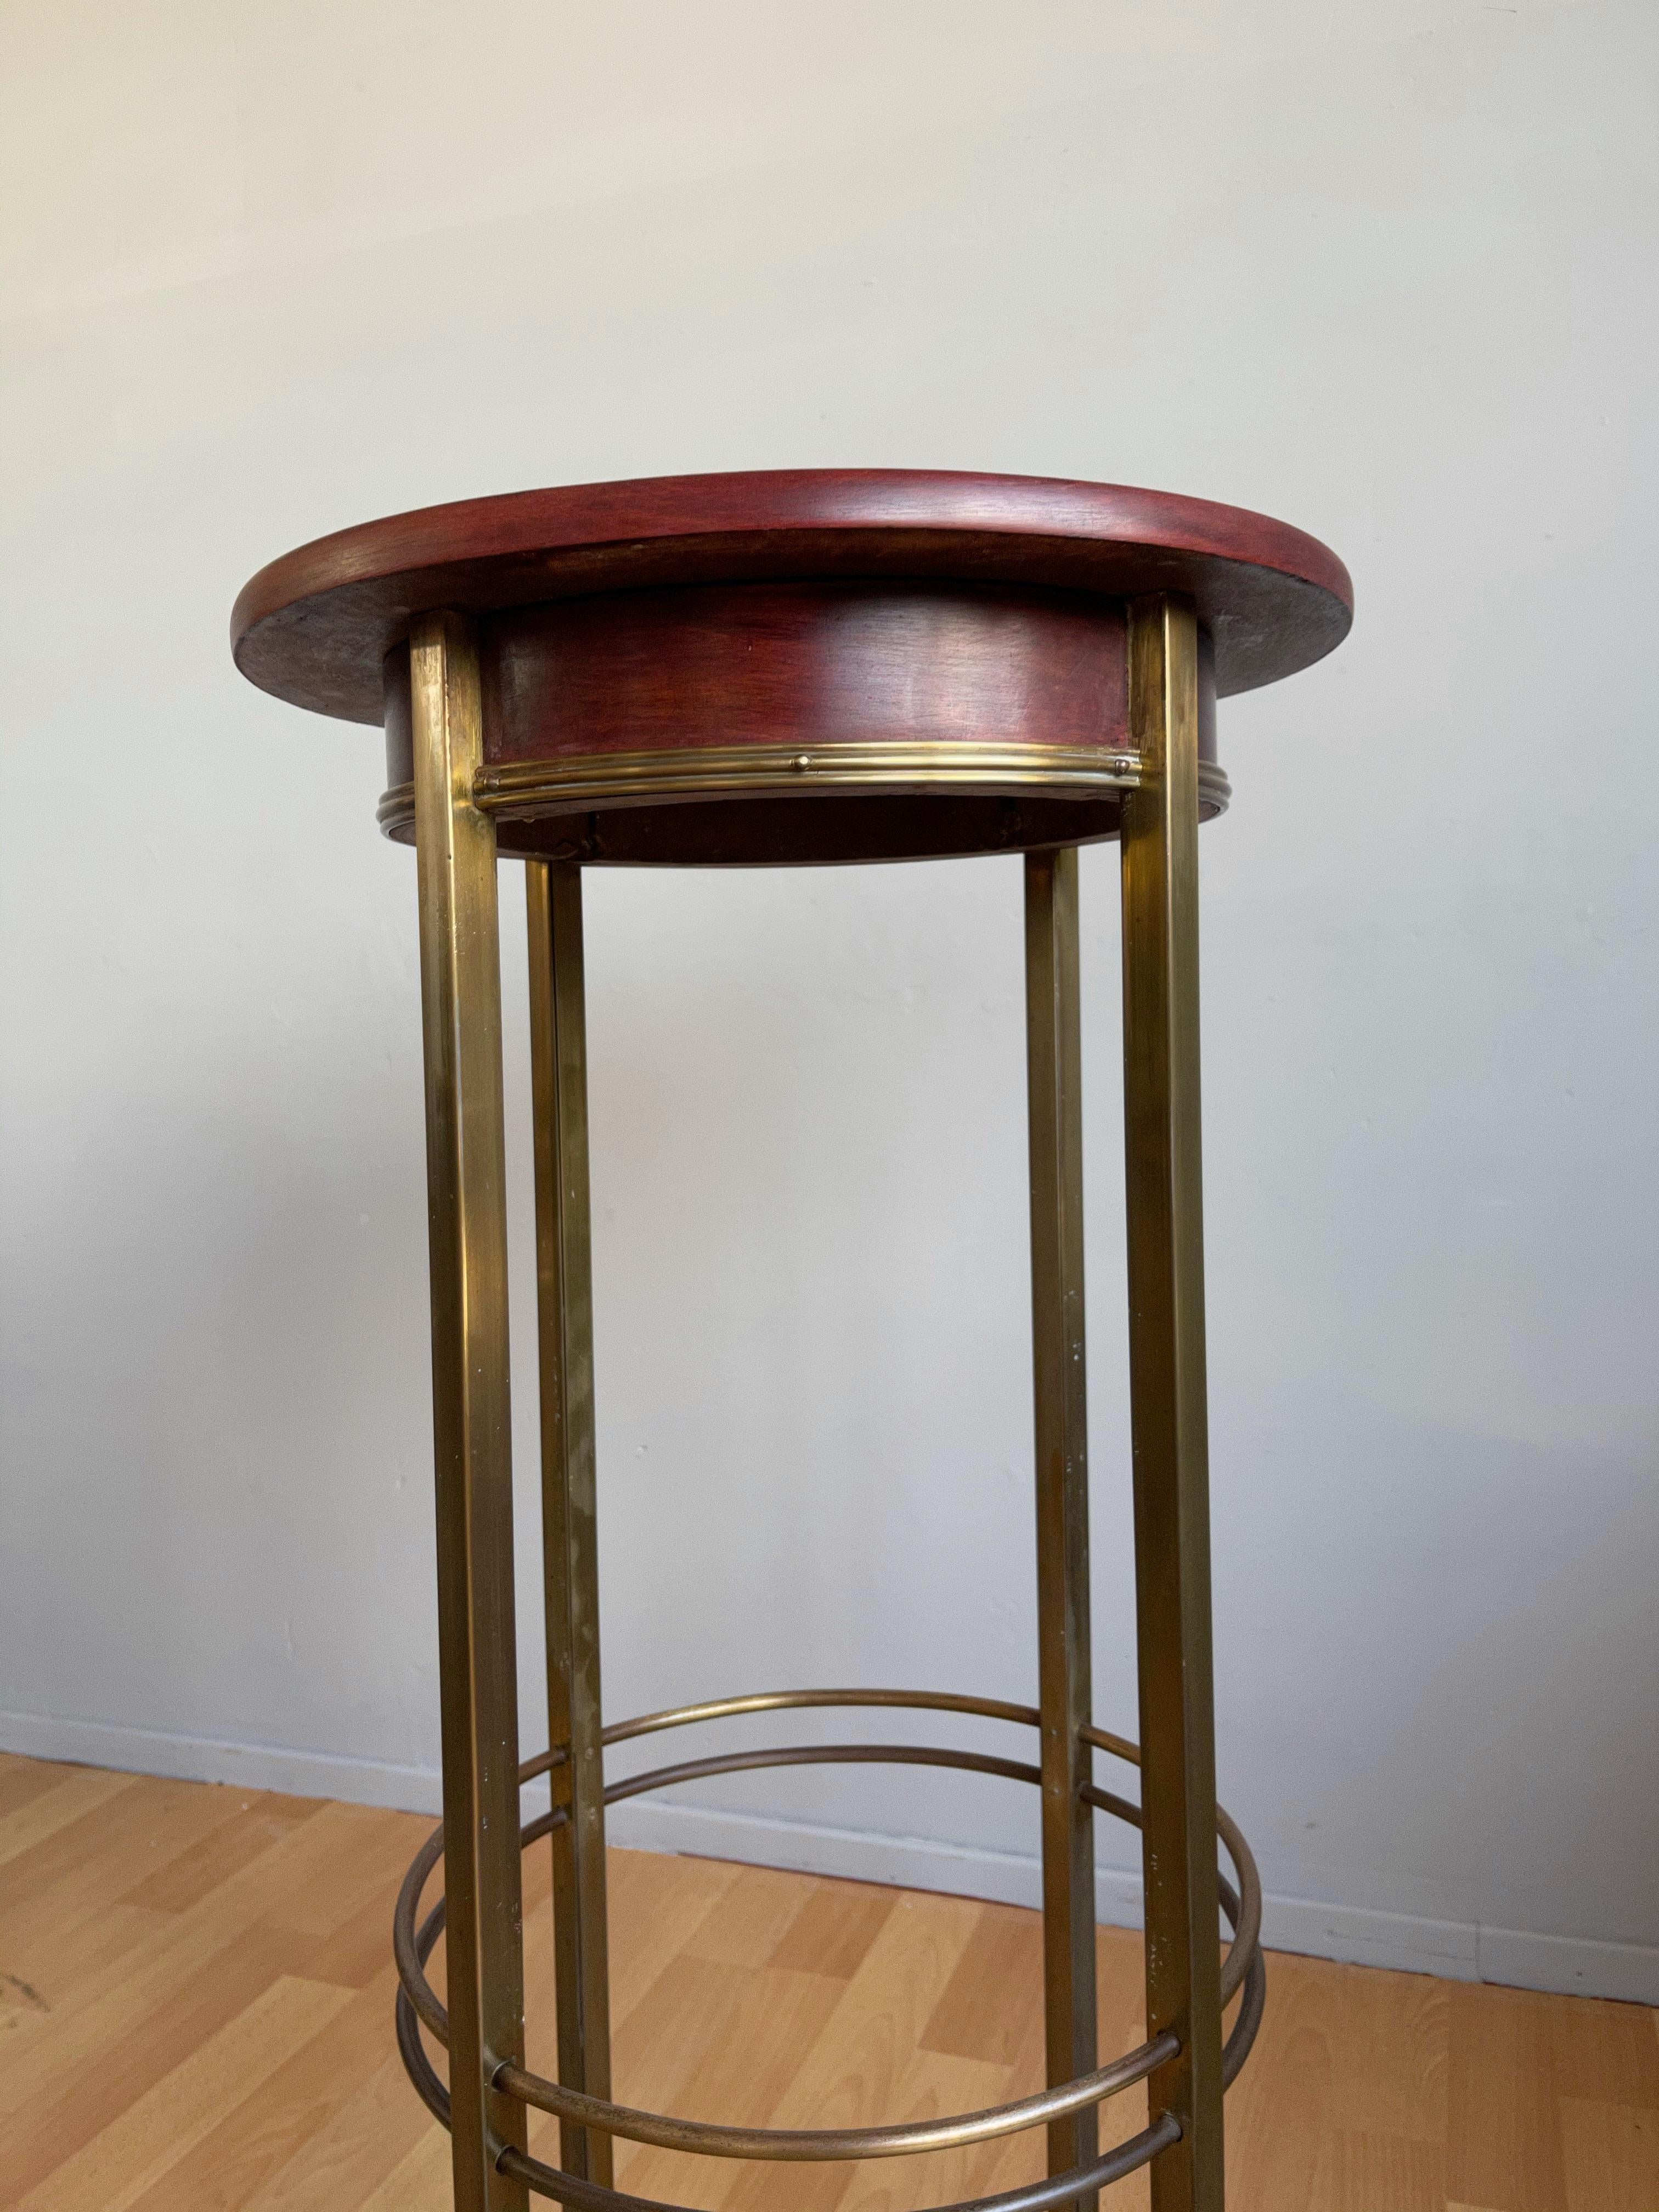 Rare Vienne Secession / Modernist Pedestal or Flower Stand by Ernst Rockhausen In Good Condition For Sale In Lisse, NL